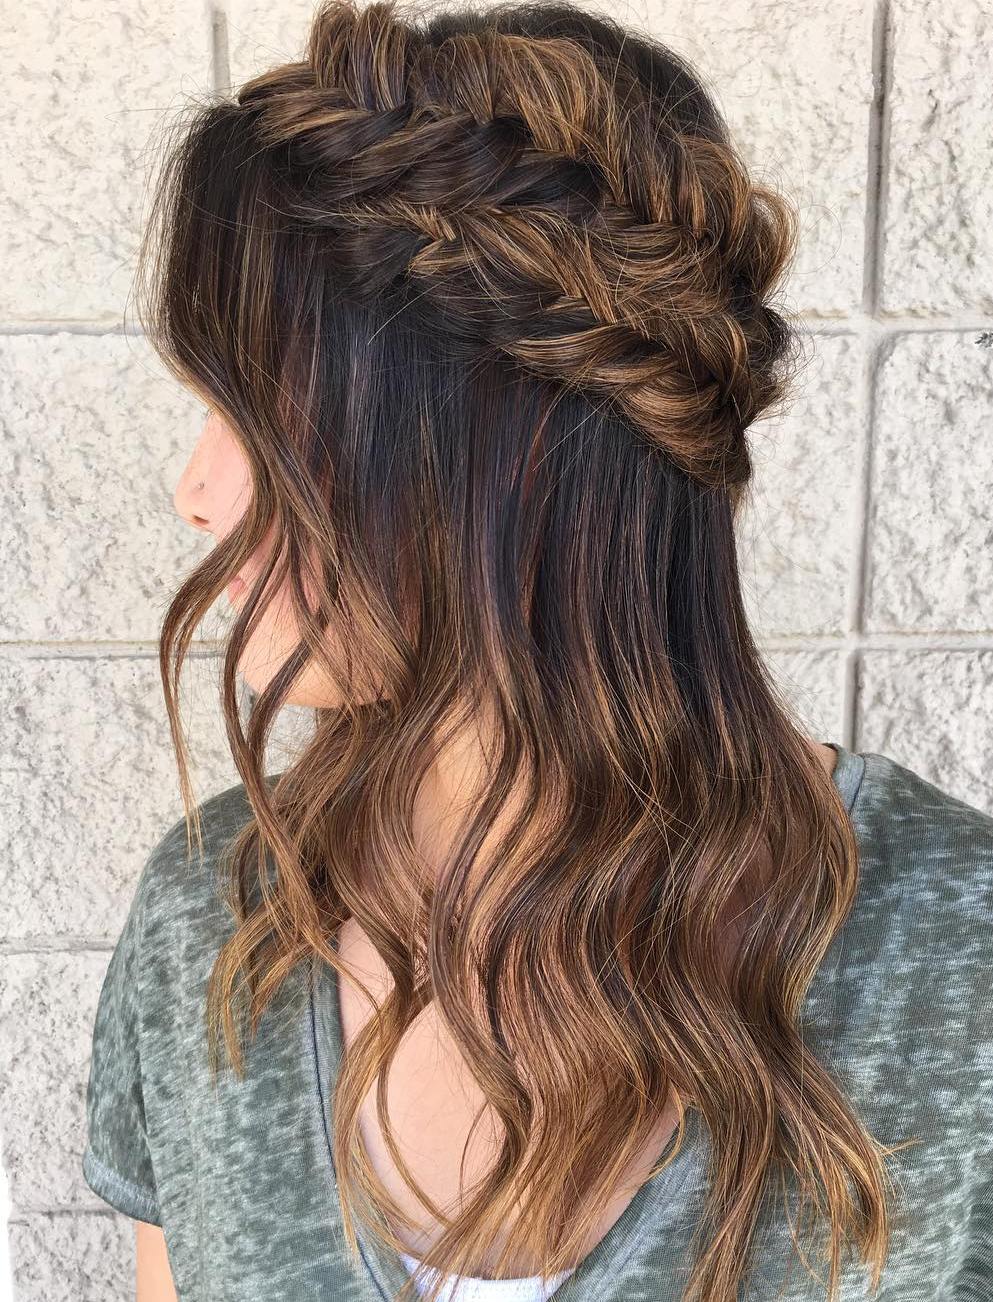 Half Updo With Crown Fishtail Braid